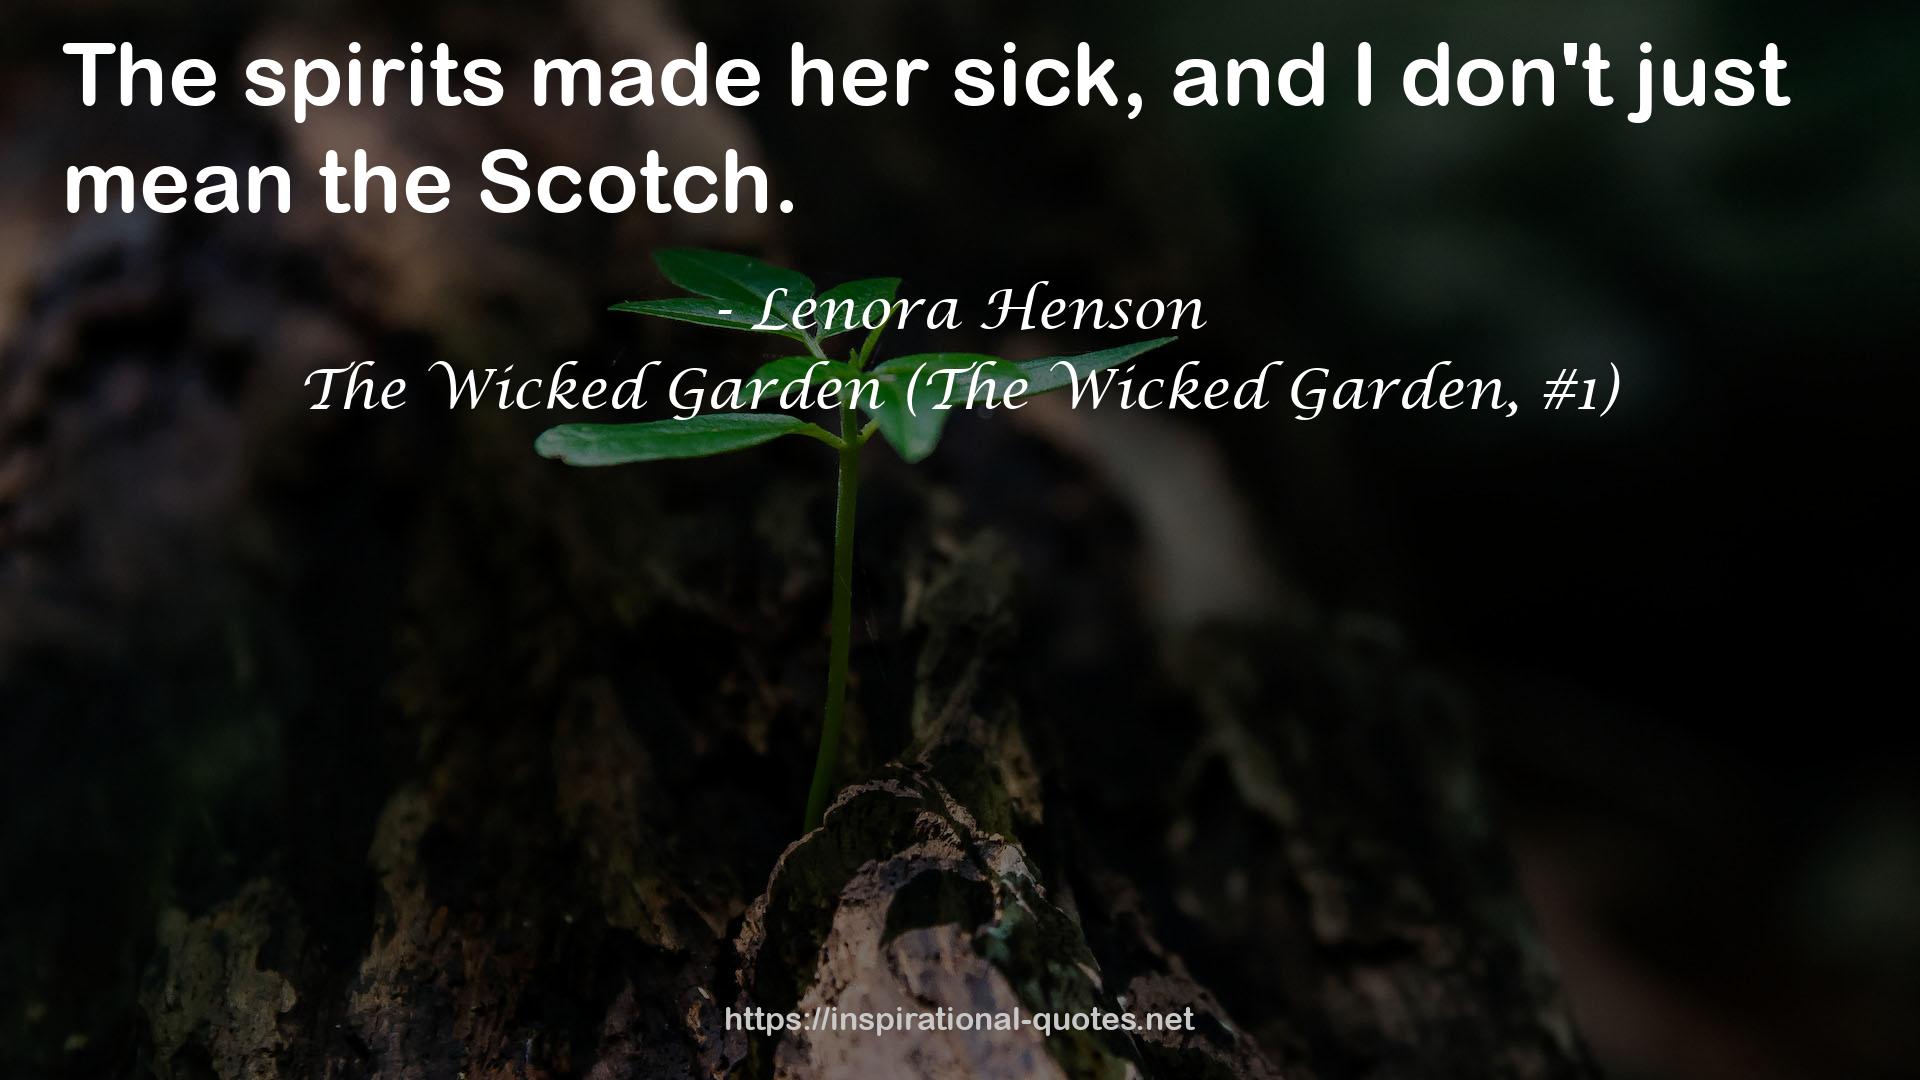 The Wicked Garden (The Wicked Garden, #1) QUOTES